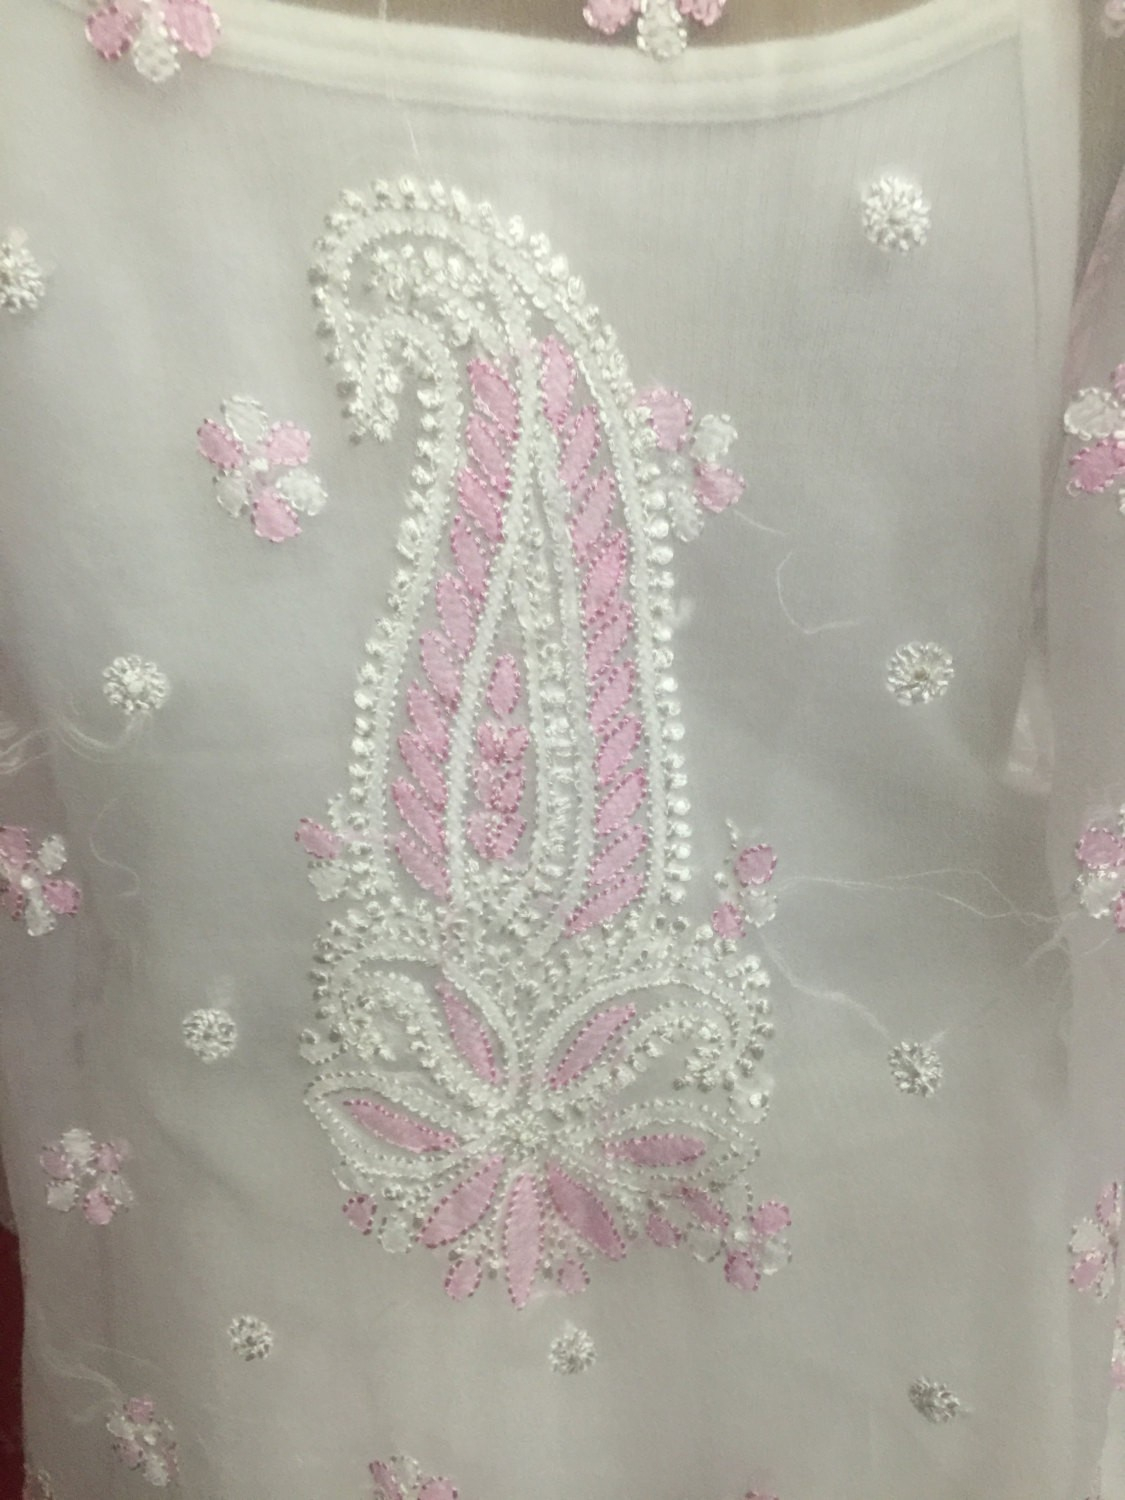 Hand Embroidery Patterns For Kurtis Handmade Long Indian Ethnic Kurta Tunic Kurti With Beautiful Hand Embroidery Chikankari All Over Thread Embroidery Of White And Pink